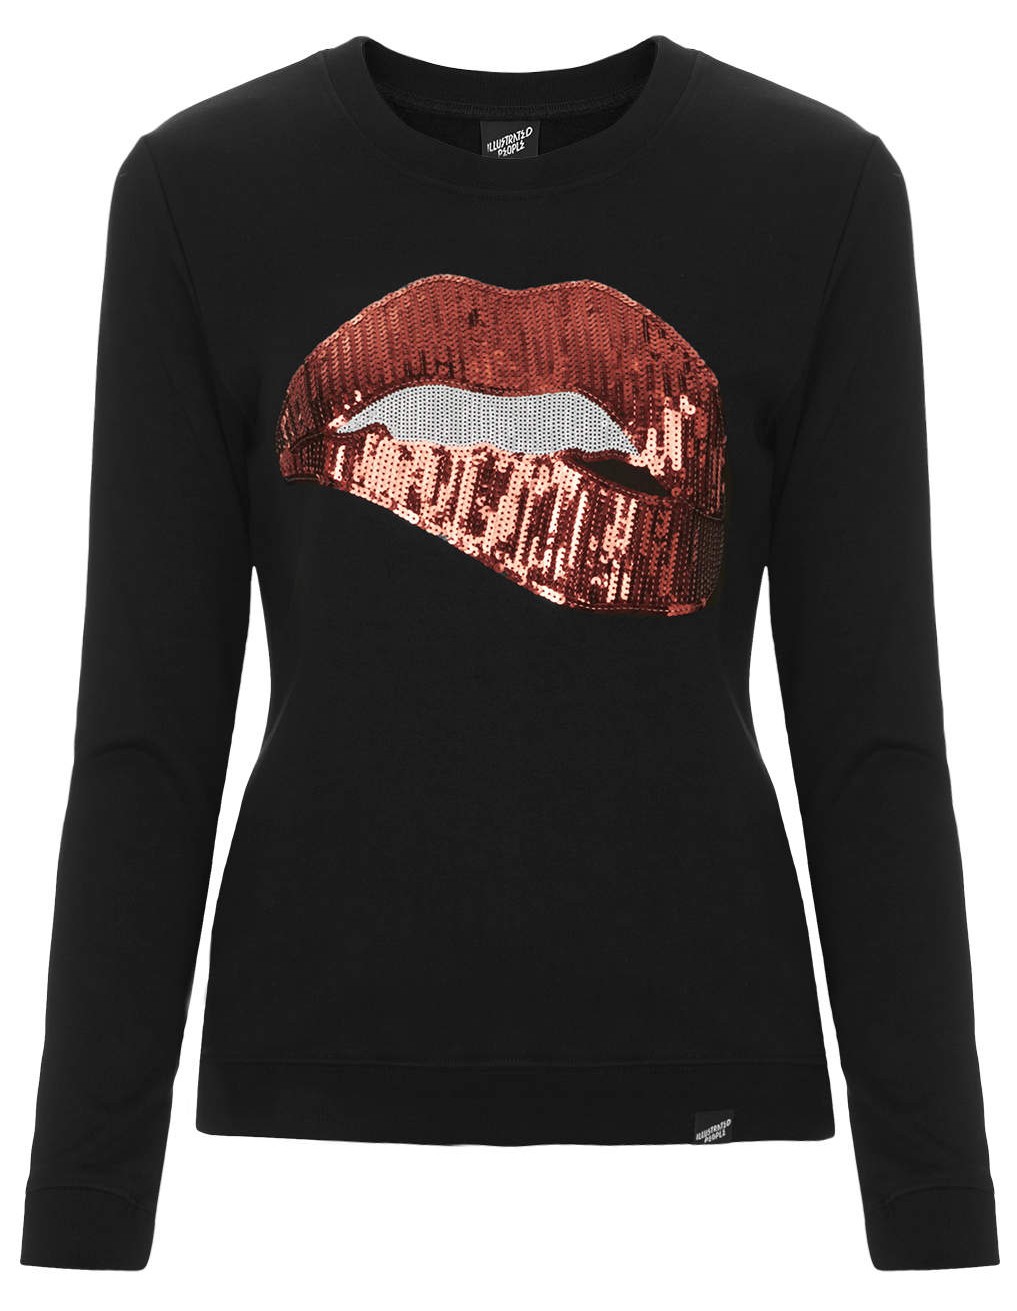 ILLUSTRATED PEOPLE LIPPY TOP